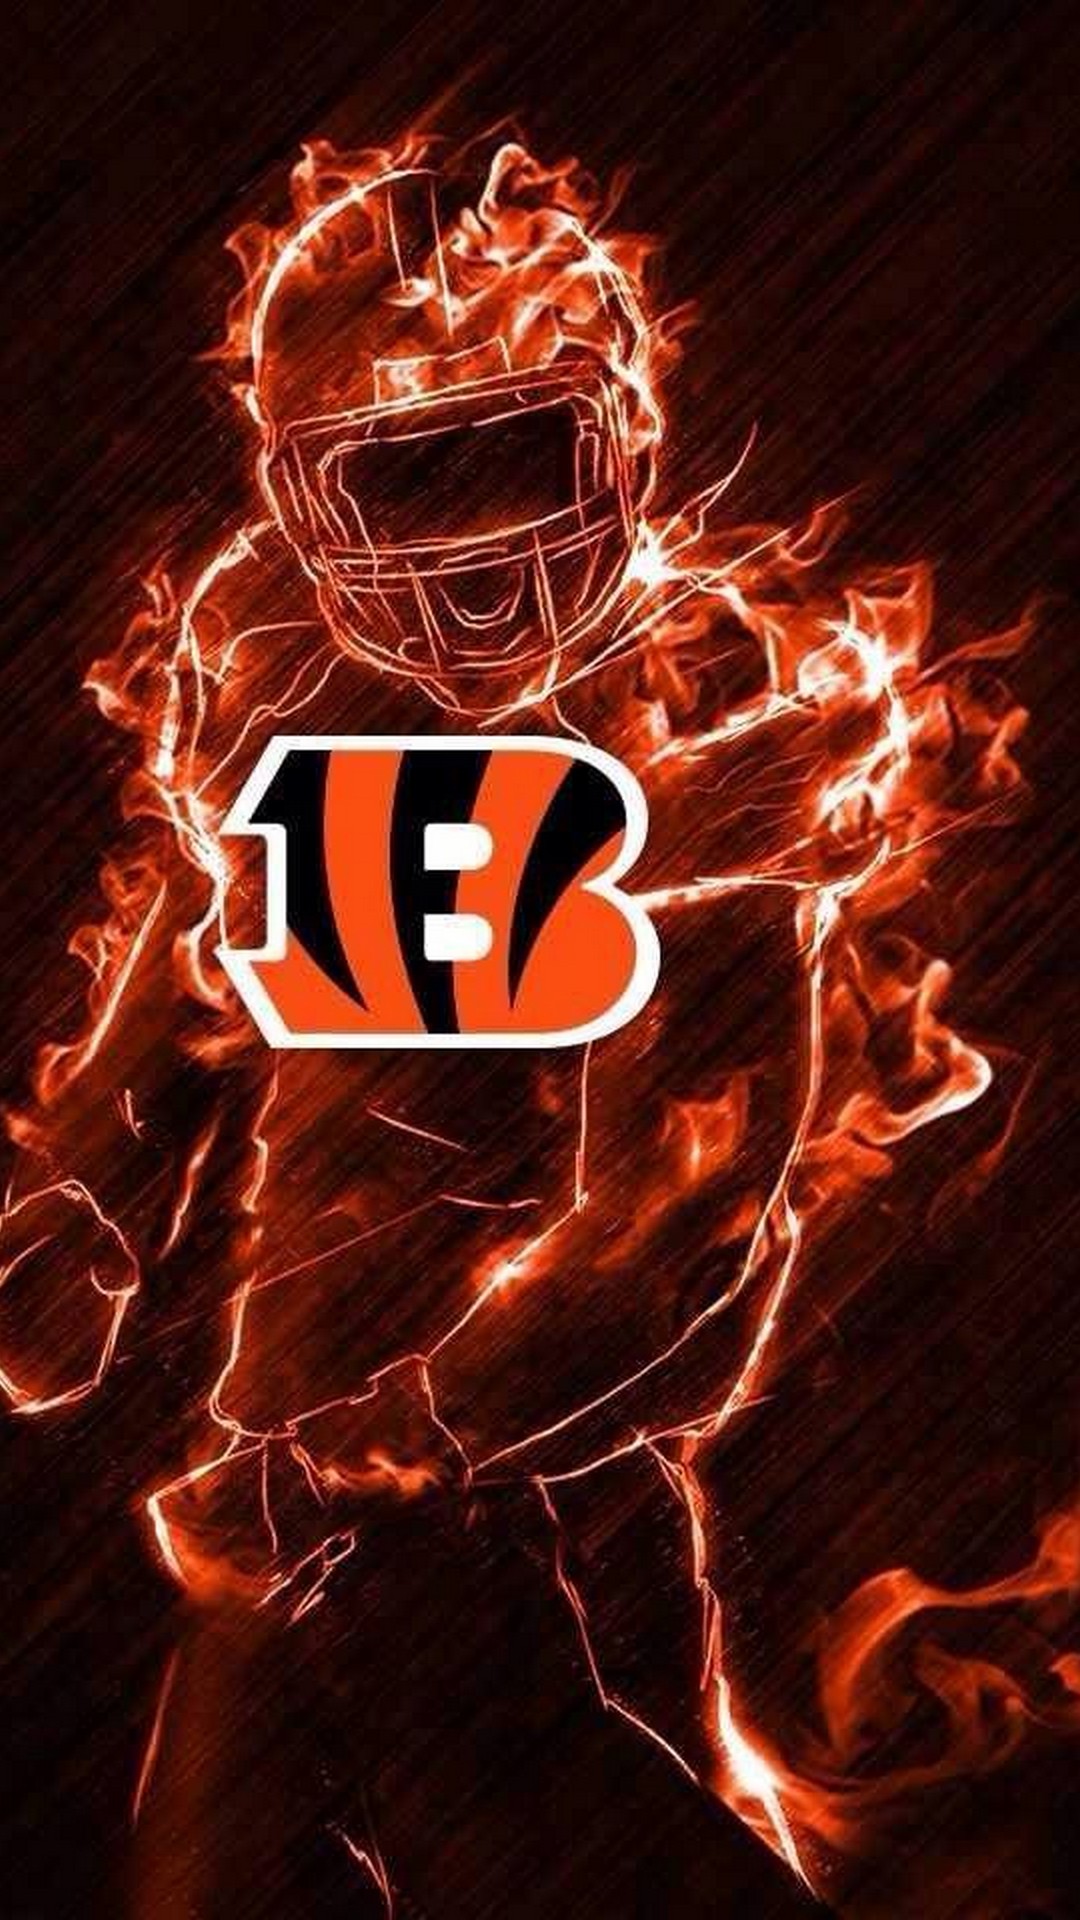 Cincinnati Bengals iPhone X Wallpaper with high-resolution 1080x1920 pixel. Download and set as wallpaper for Apple iPhone X, XS Max, XR, 8, 7, 6, SE, iPad, Android